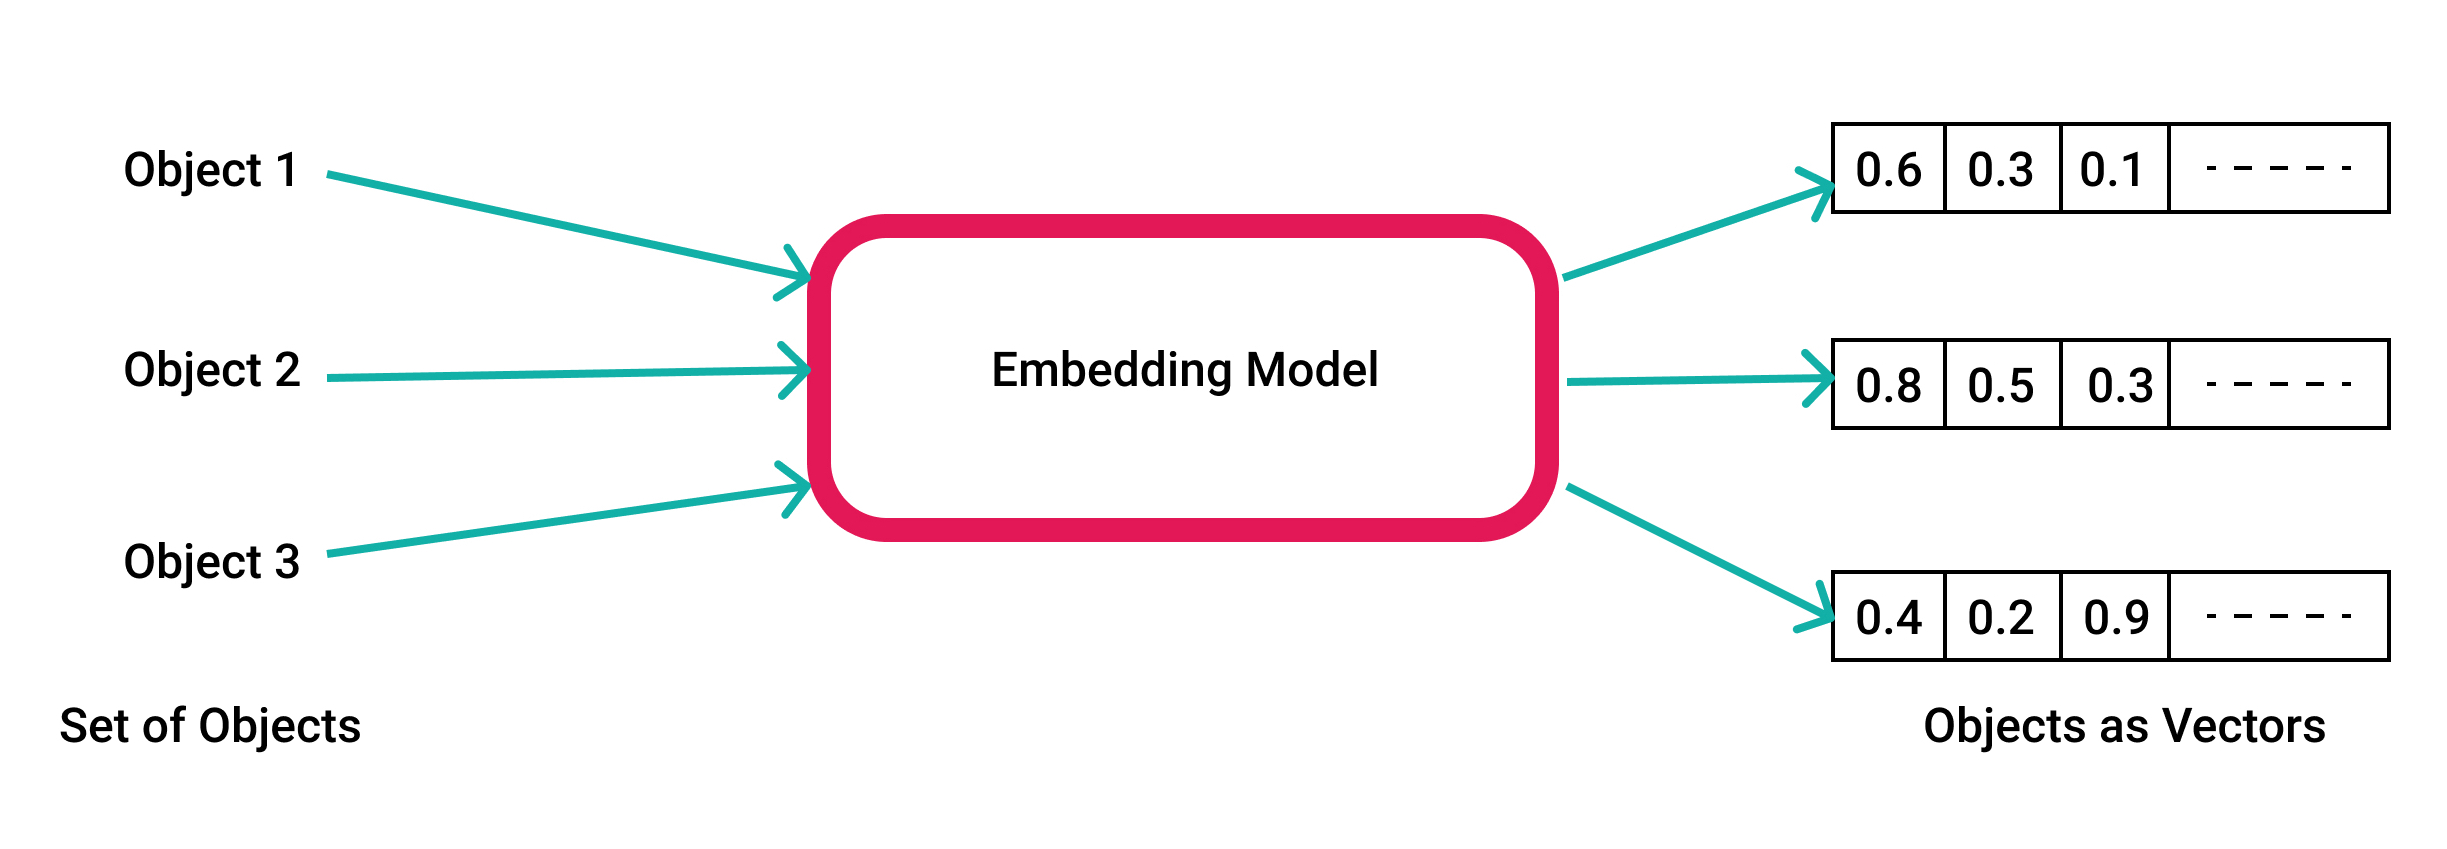 Vector Embeddings are a list of numbers